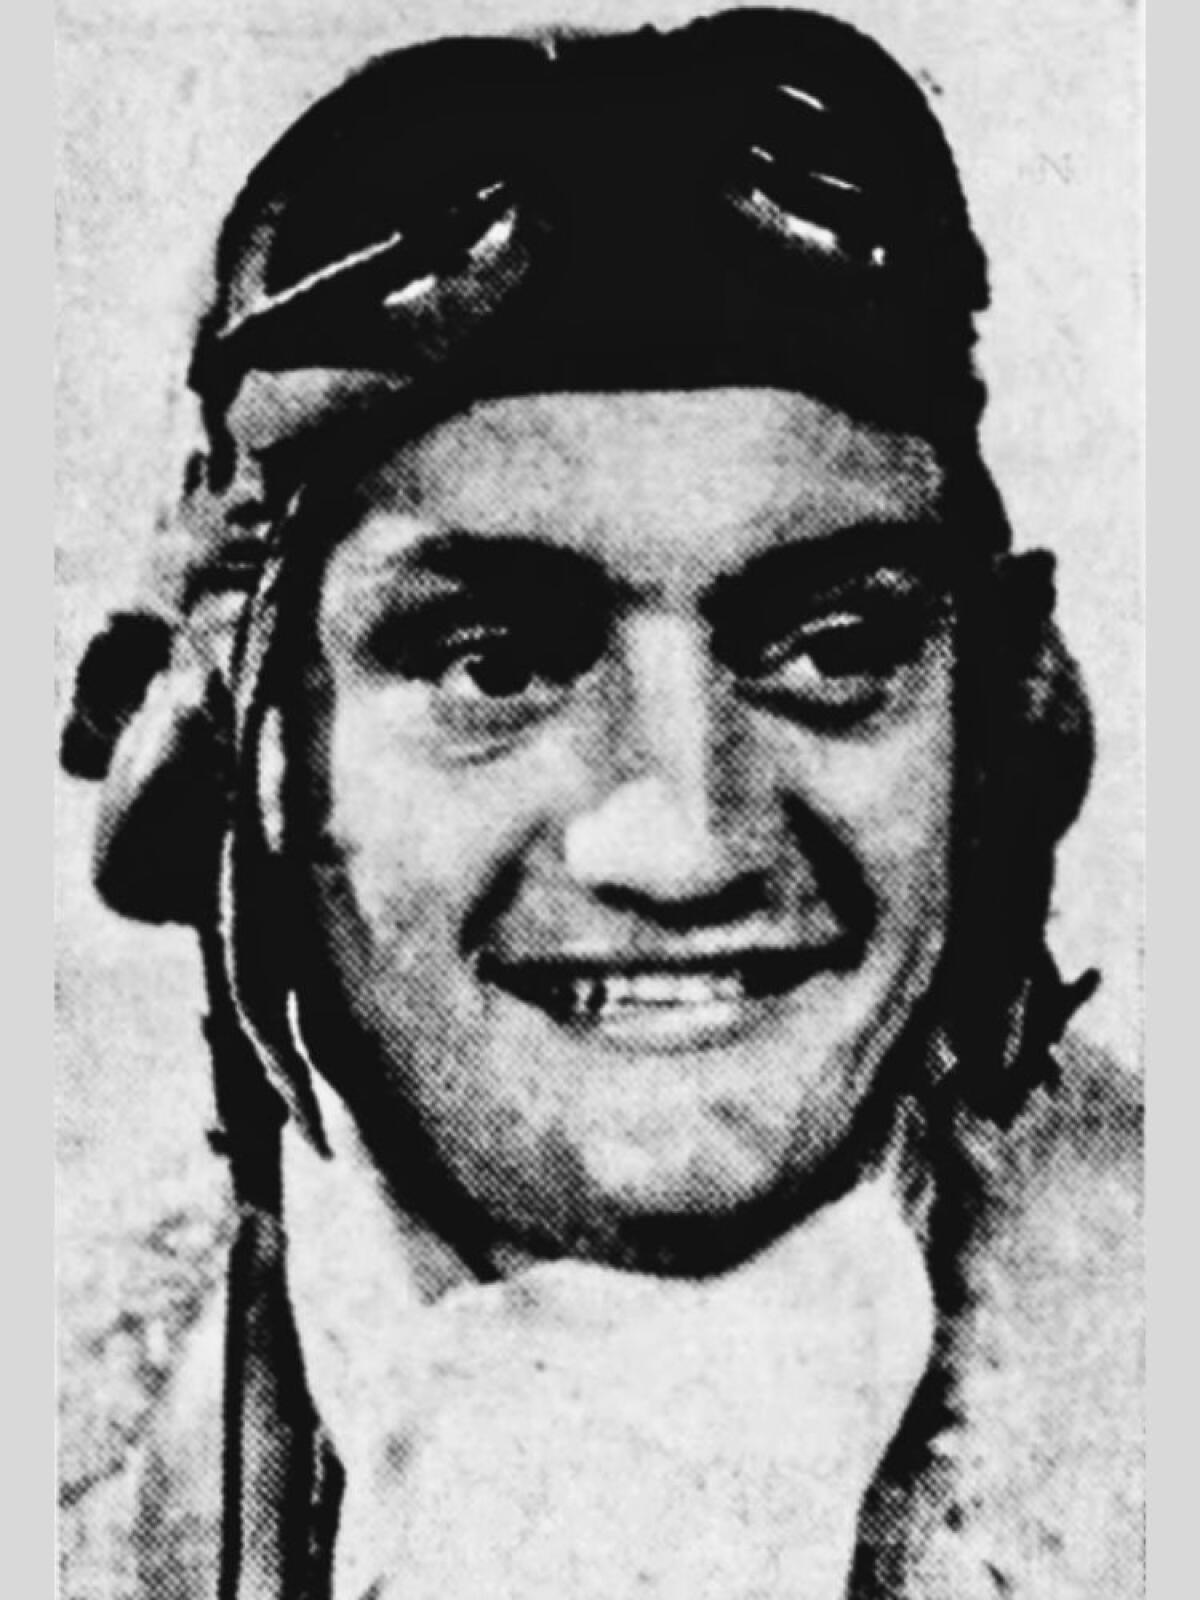 This photo of Yager appeared in the Palmyra Spectator, a Missouri newspaper, on December 20, 1944.